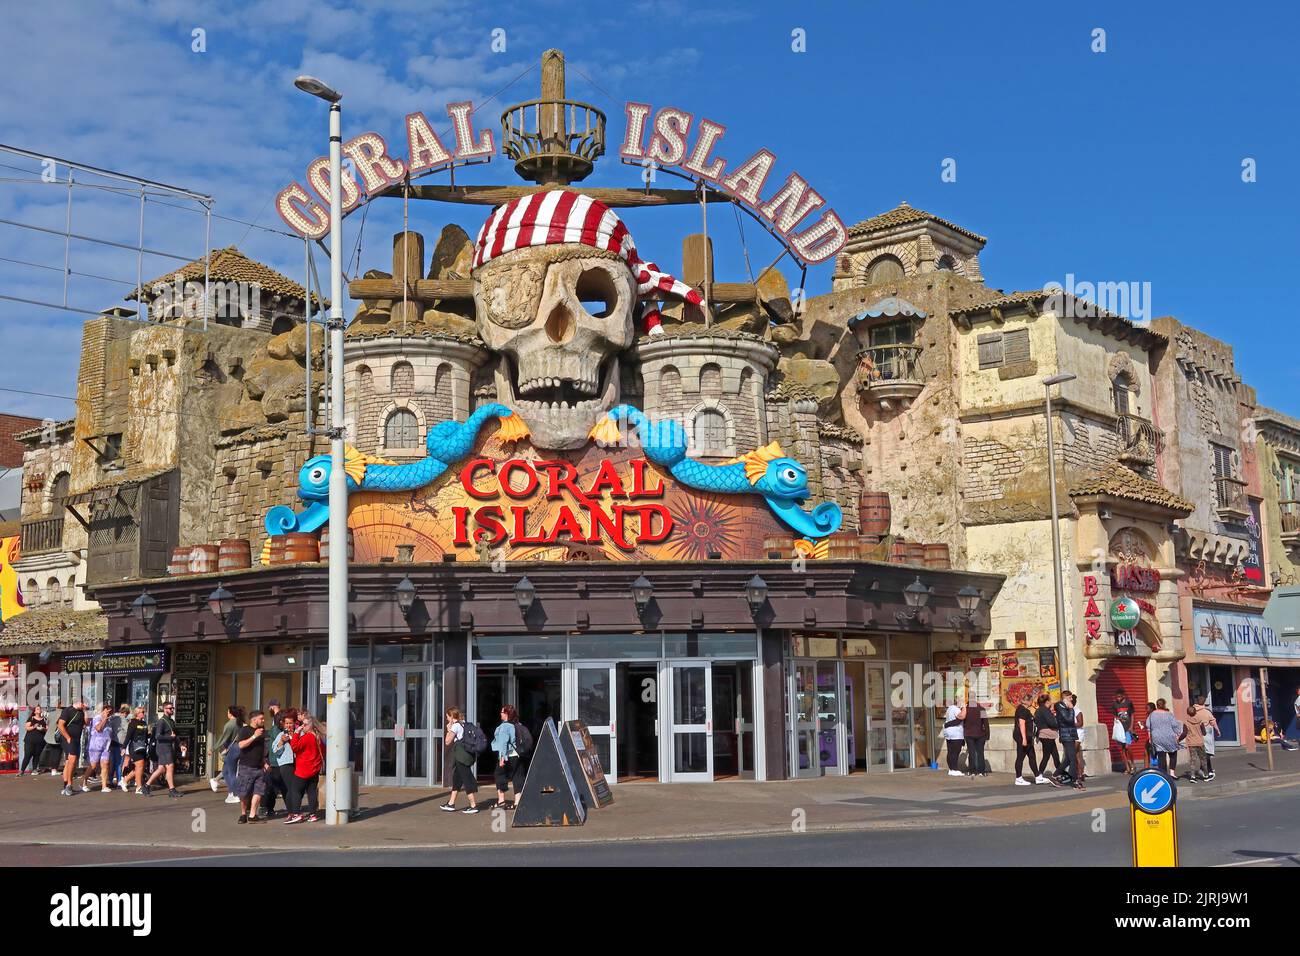 Coral island entertainment and amusement centre, the Golden Mile, Central promenade, Blackpool seaside resort, Lancashire, England, UK, FY1 5DW Stock Photo